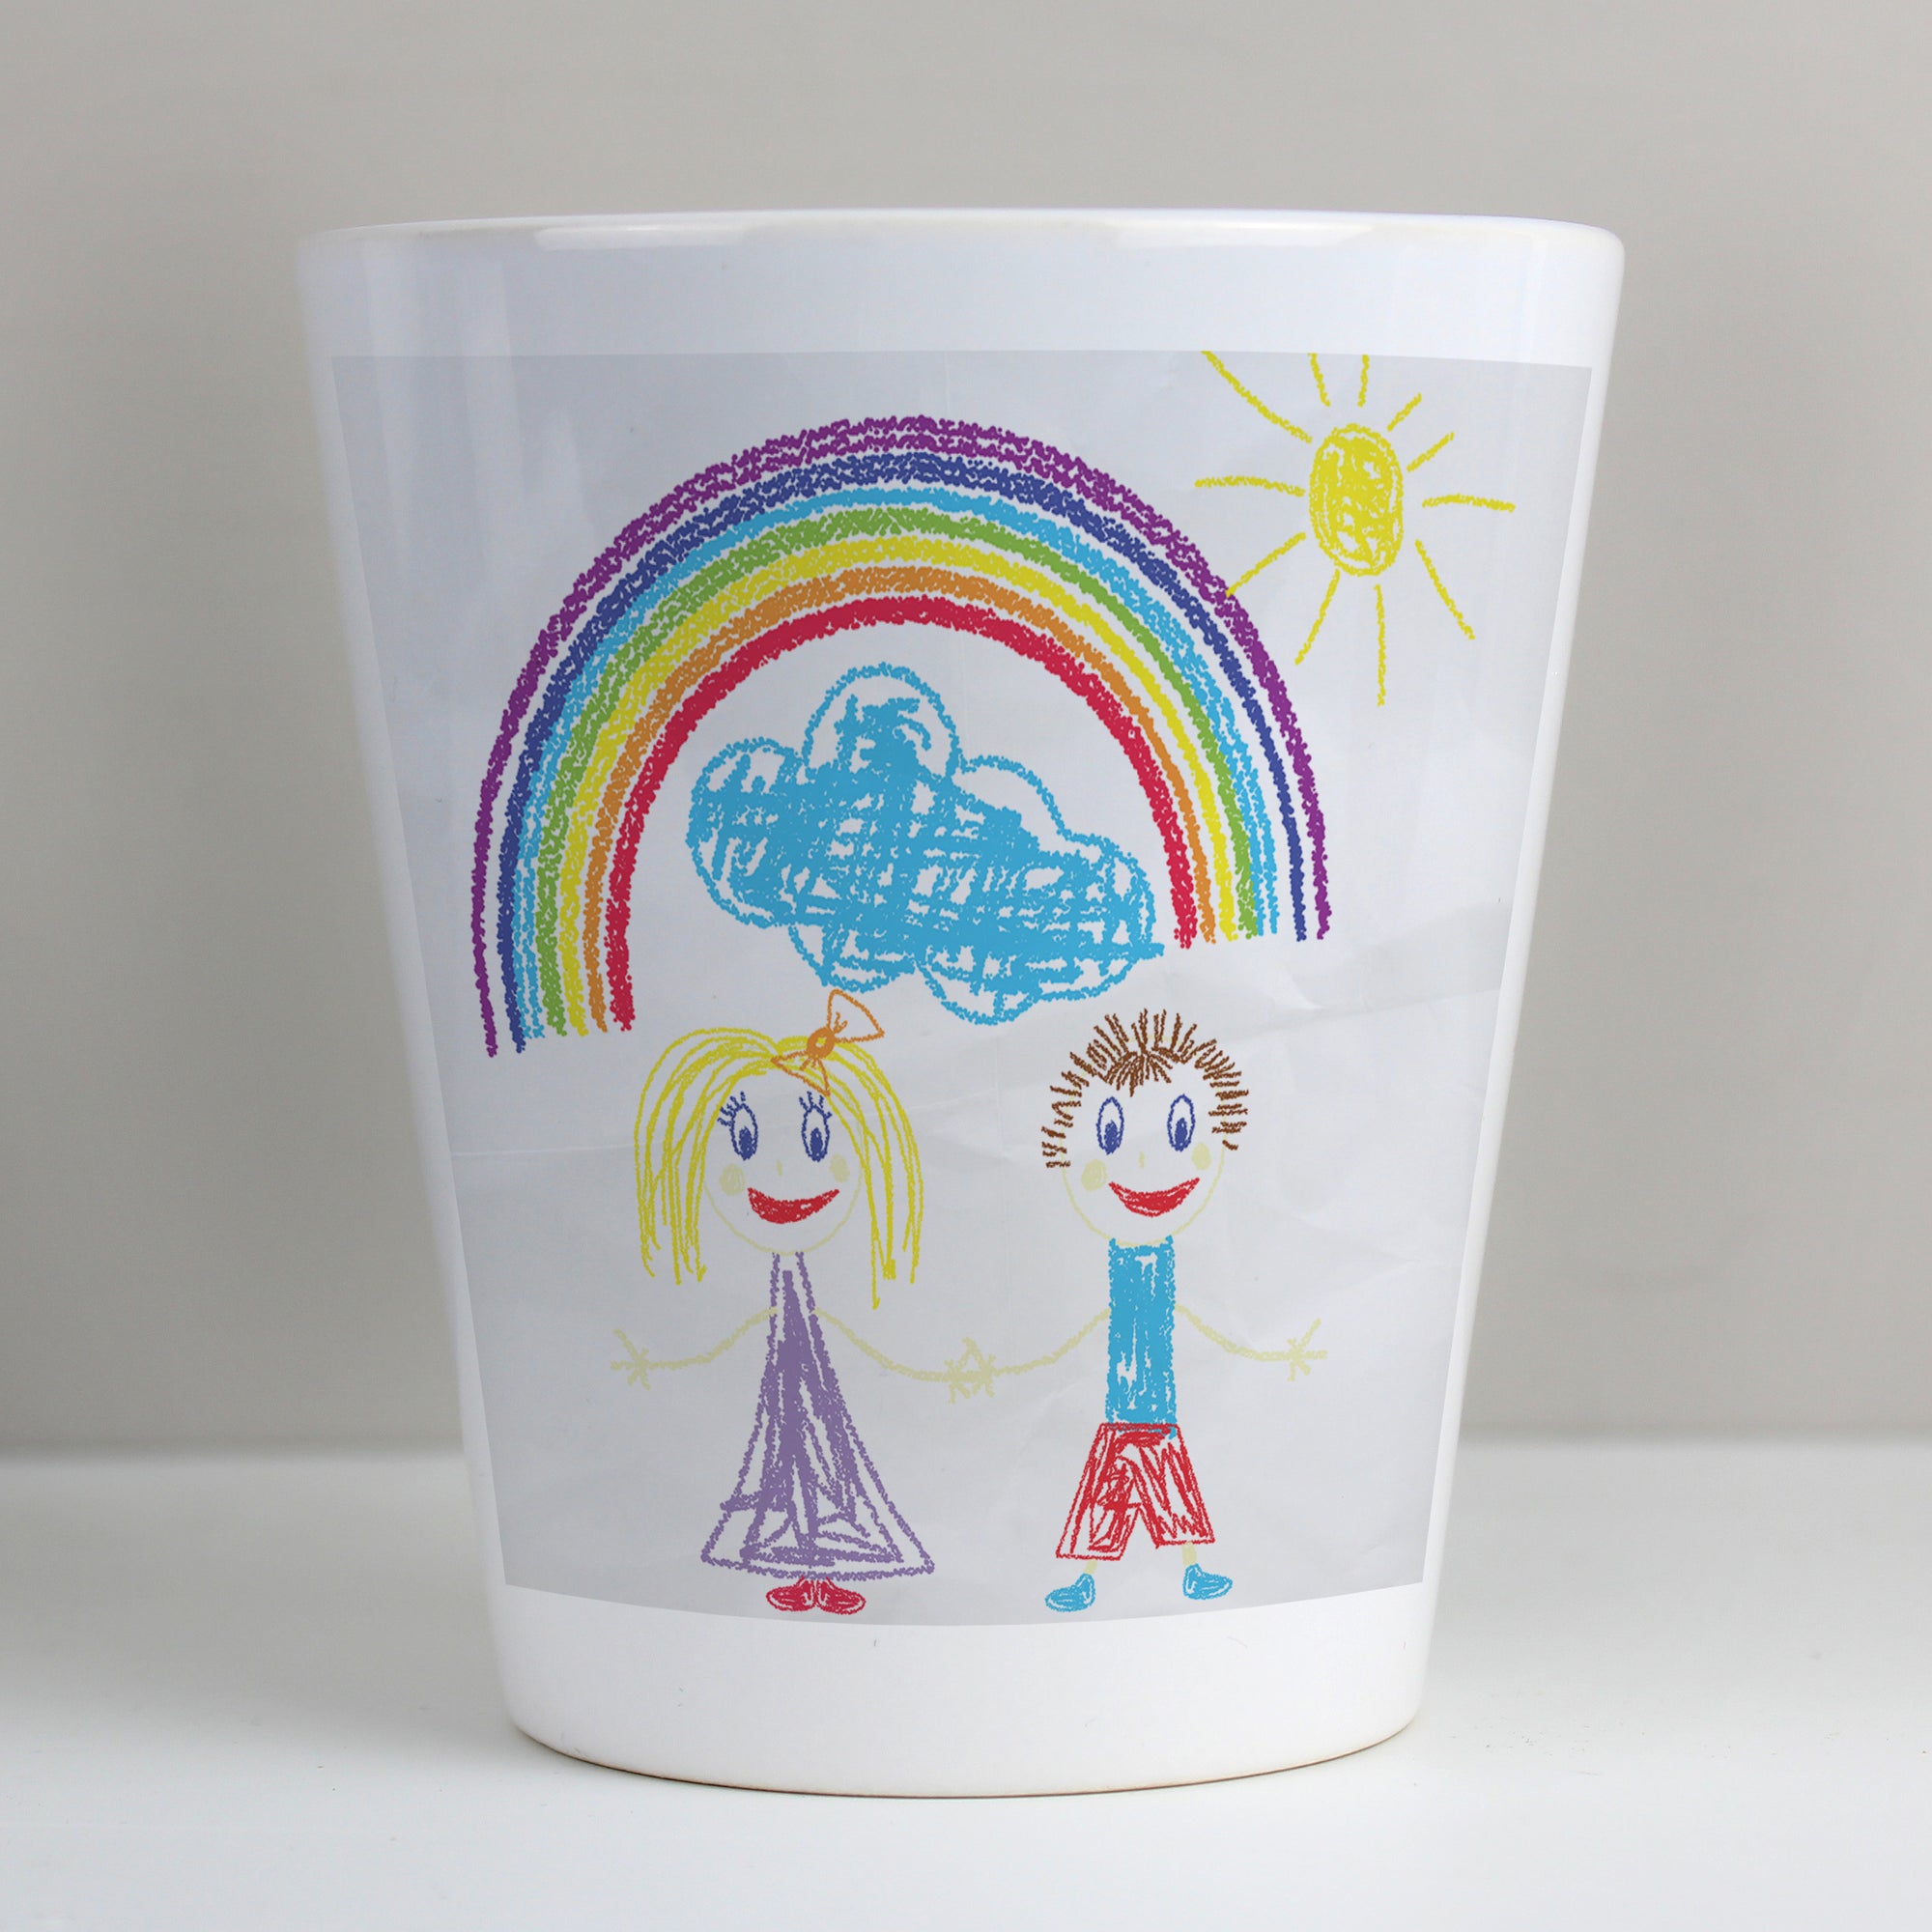 Image of a white ceramic plant pot with a plant inside it. The plant pot can be printed with your child's own artwork that will be printed on the front and there is space underneath the artwork for you own optional text which will be printed in a black handwritten style font.